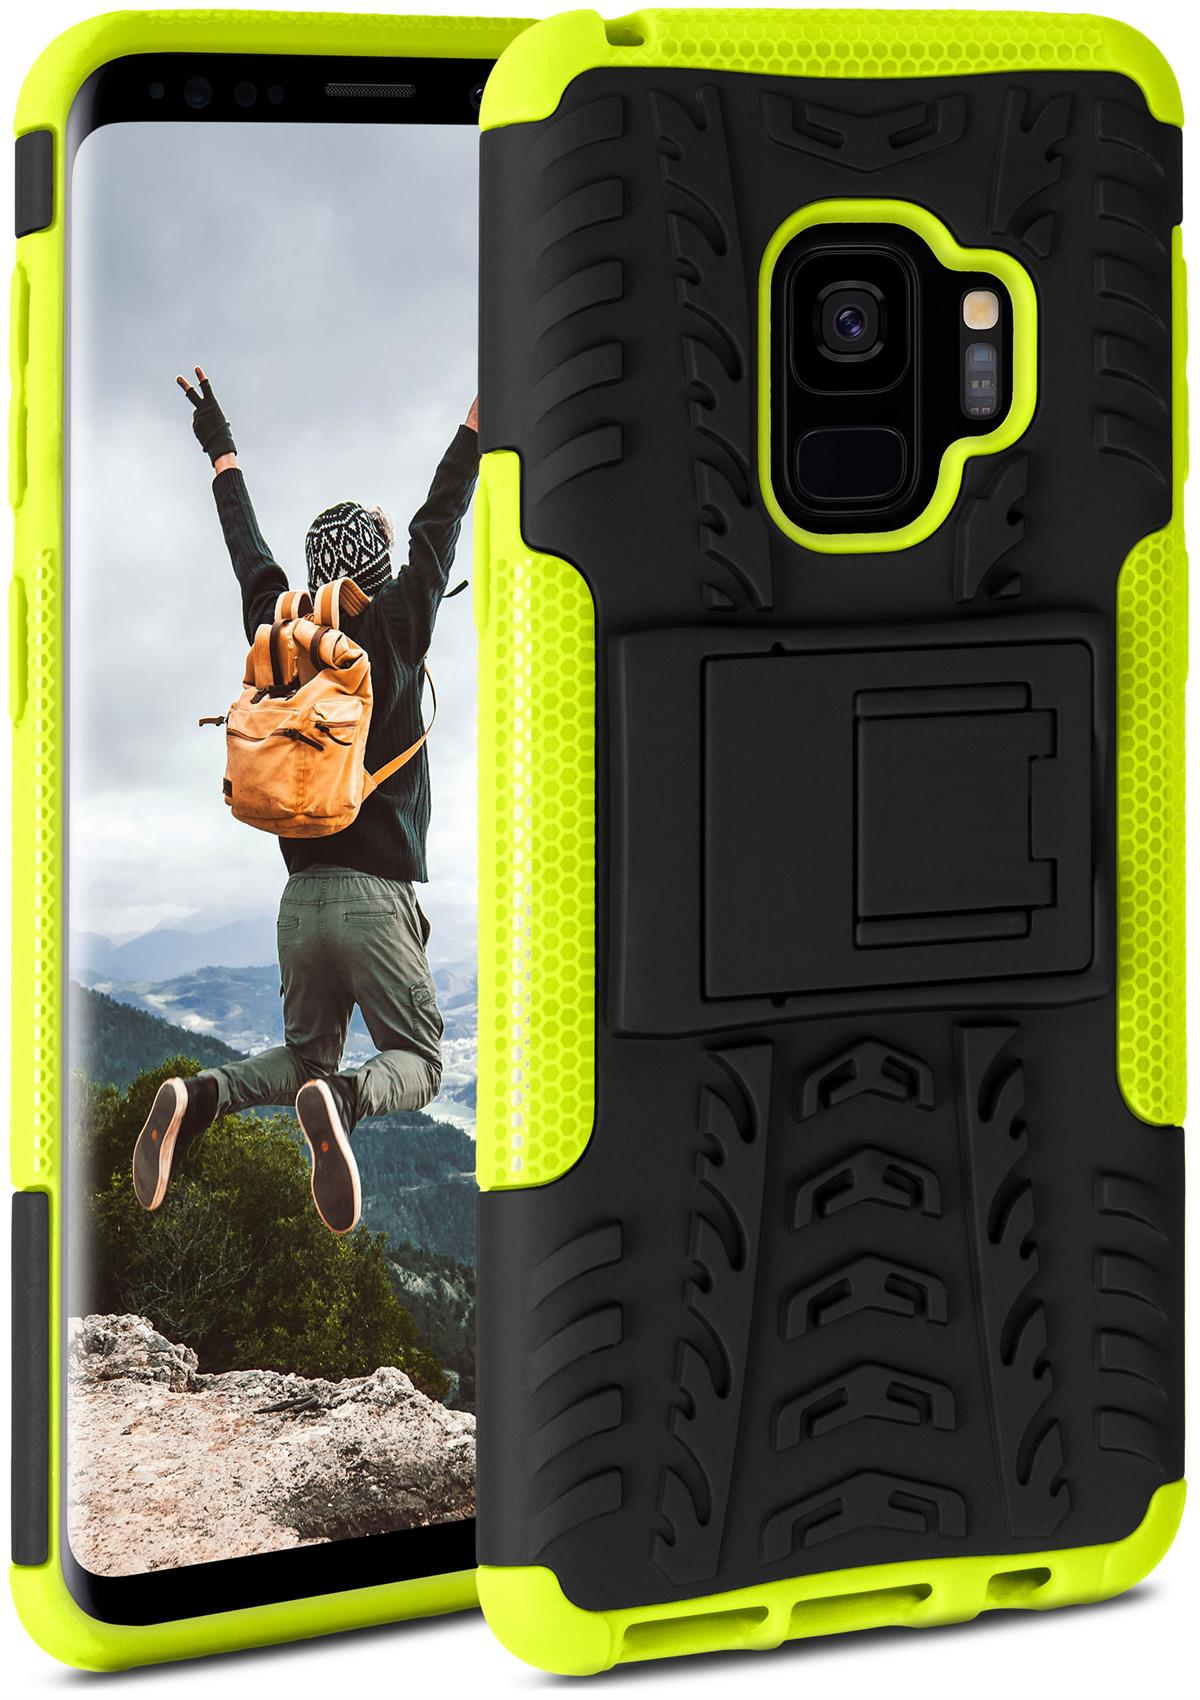 ONEFLOW Tank S9, Backcover, Case, Galaxy Lime Samsung